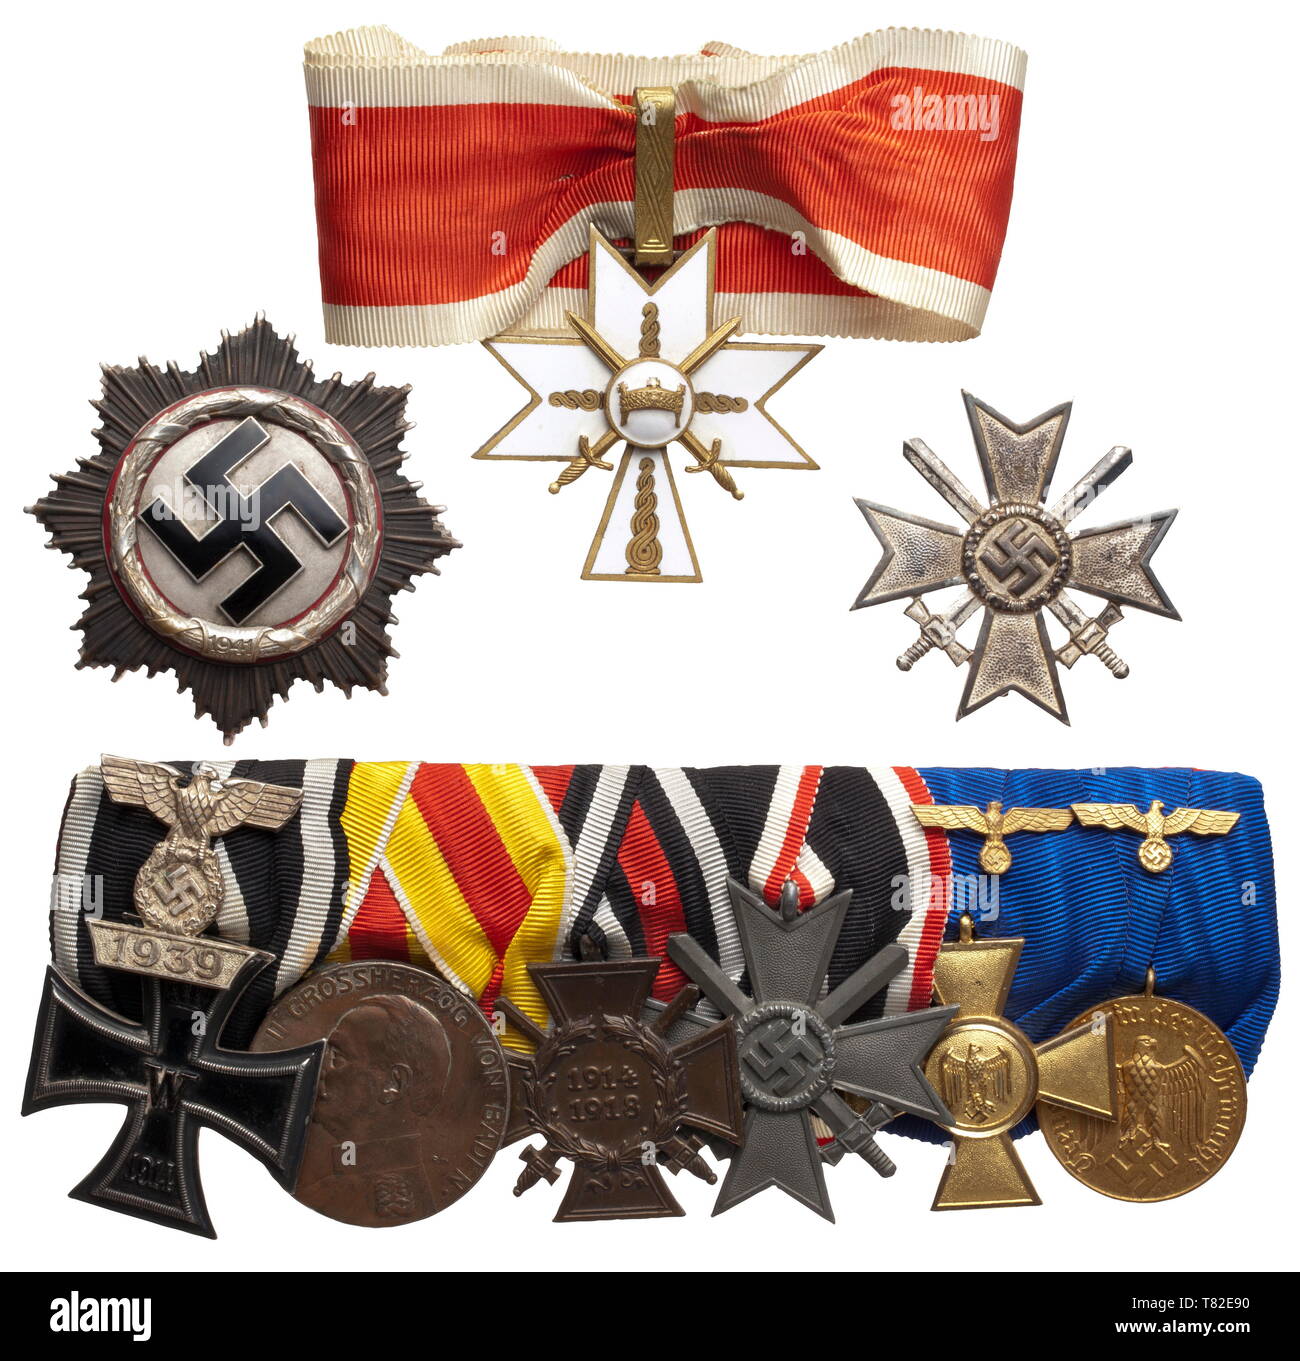 Oberst Albert Bedenk - a German Cross in Silver, an orders clasp and documents of the Panzer army information officer, 2nd Panzer Army. German Cross in Silver, the enamelled swastika with minimal scratch marks, reverse attachment pin and four rivets. No maker's mark, yet typical of the Deschler firm in Munich. Weight 69.6 g. The six-piece orders clasp with the Wehrmacht Long Service Awards for 25 and 12 Years with applied repetition clasp to the Iron Cross 2nd Class of 1 20th century, Editorial-Use-Only Stock Photo